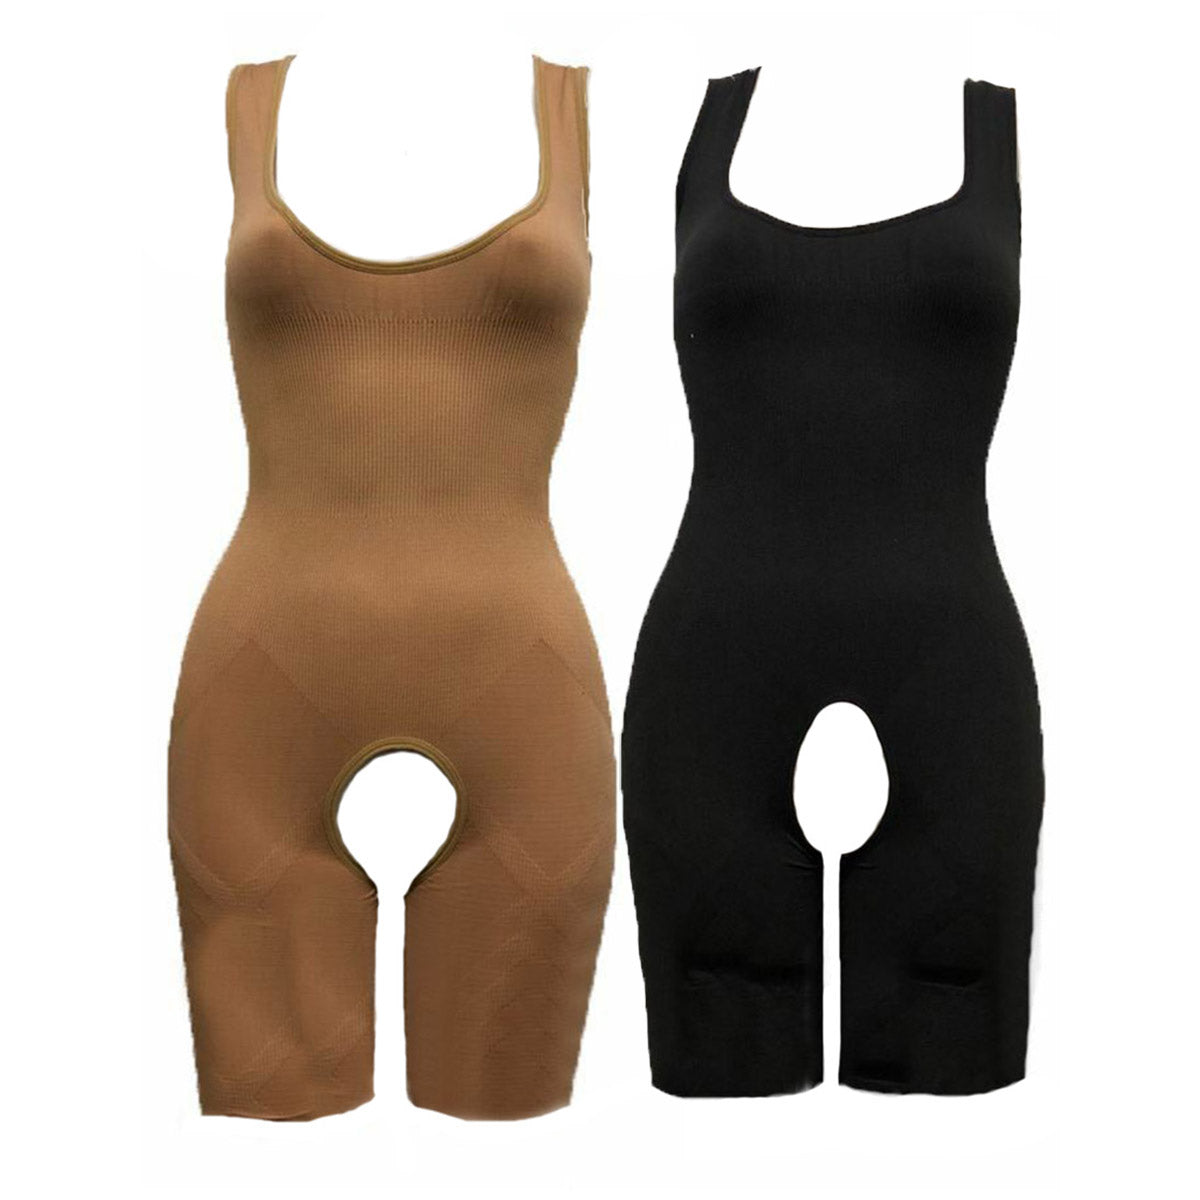 Elasticated all in one crotchless bodysuit shaper underwear / shorts –  rockthosecurves